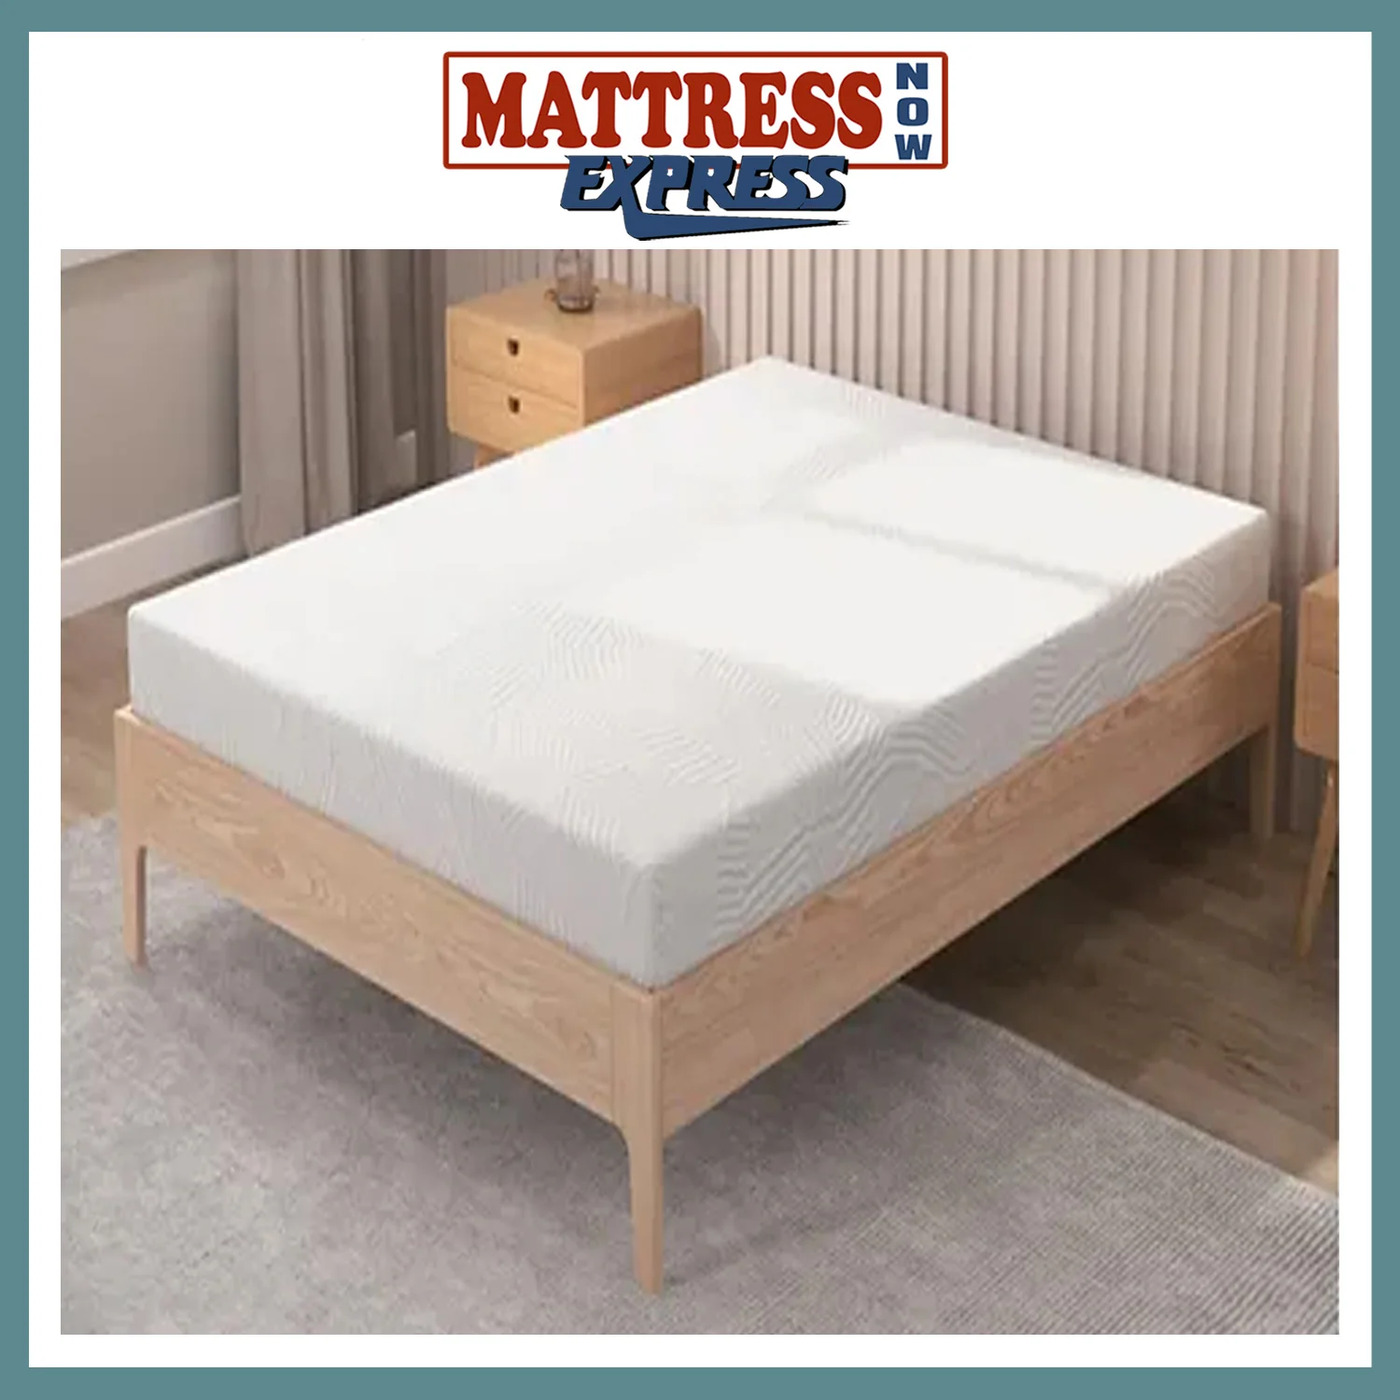 Mattress Now – Wake Forest Store is the #1 mattress store in Wake Forest, NC. It has other locations in Raleigh and Garner, NC.